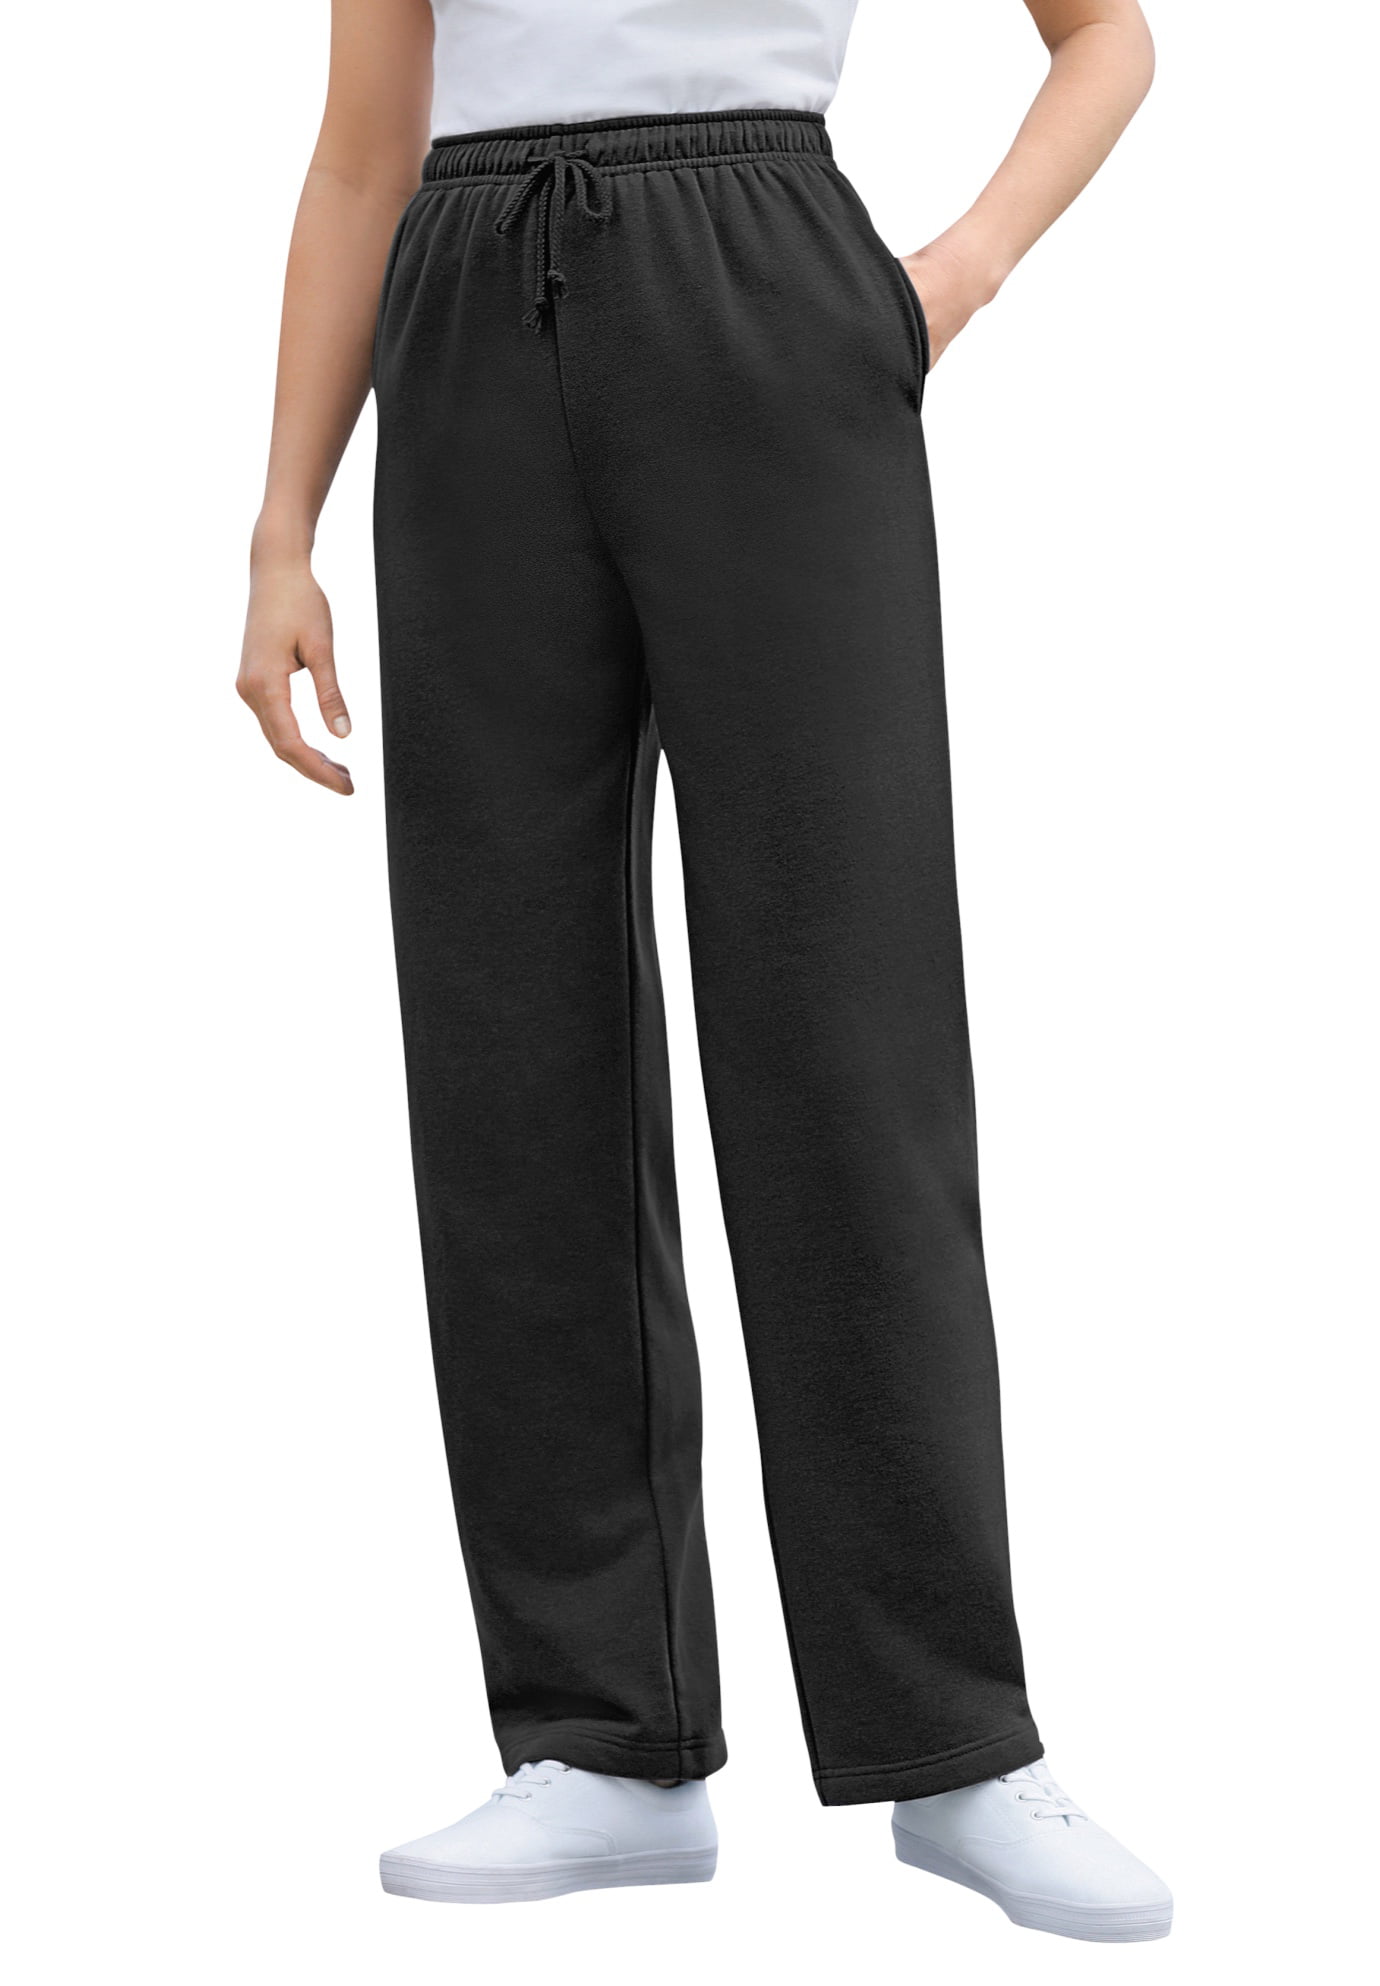 Woman Within - Woman Within Women's Plus Size Tall Better Fleece Sweatpant Pant - Walmart.com 